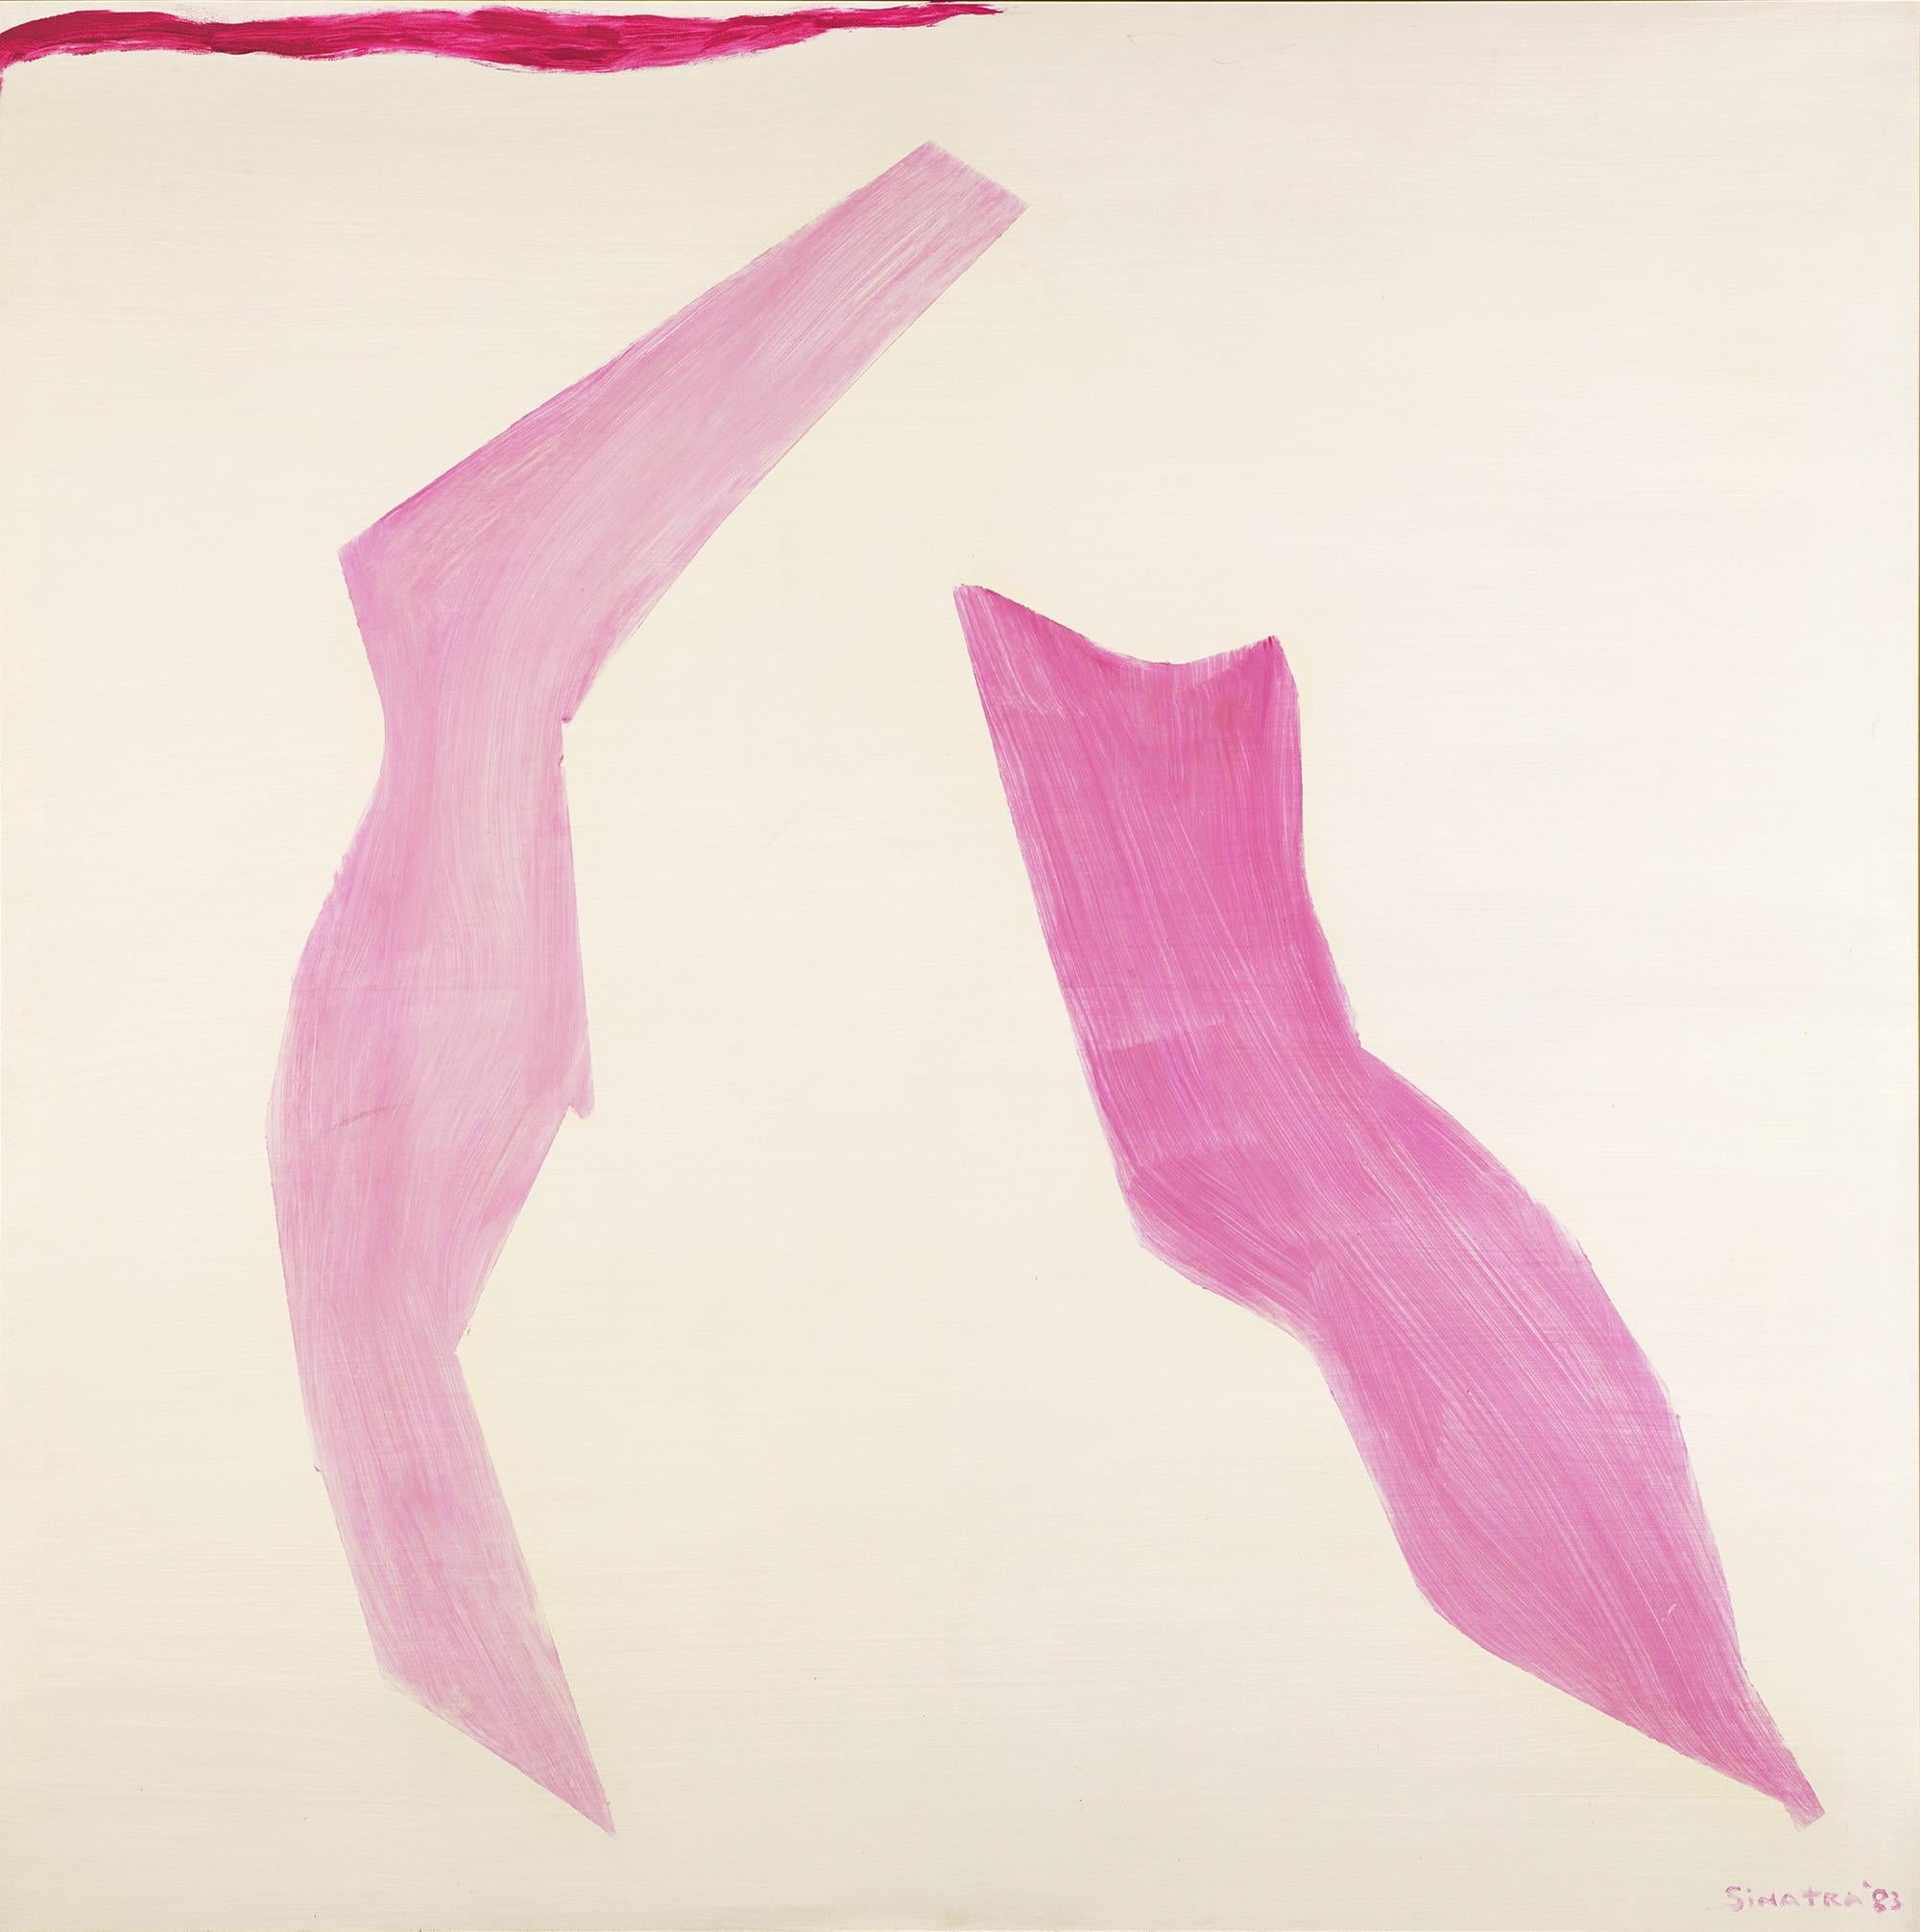 Frank Sinatra
1915-1998  American

Abstract in Pink, Purple, and White by Frank Sinatra

Signed and dated "Sinatra '83"(lower right)
Oil on canvas

Widely considered the greatest American singer of pop music of the 20th century, Frank Sinatra was